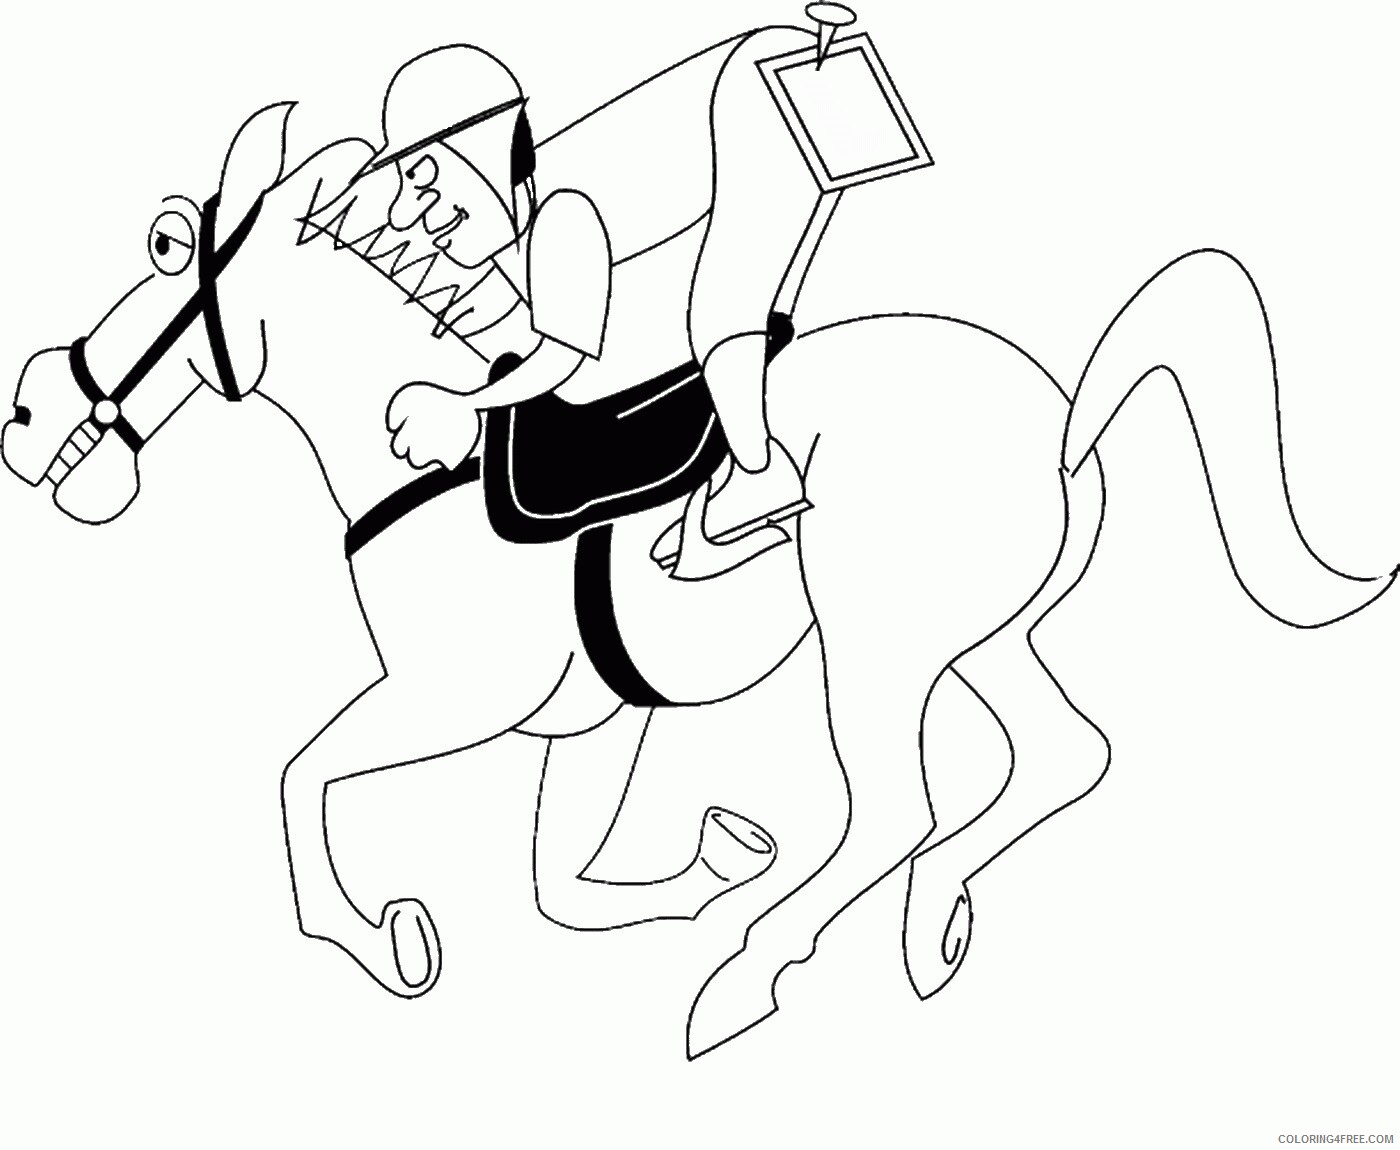 Sports Coloring Pages sports_cl_064 Printable 2021 5798 Coloring4free